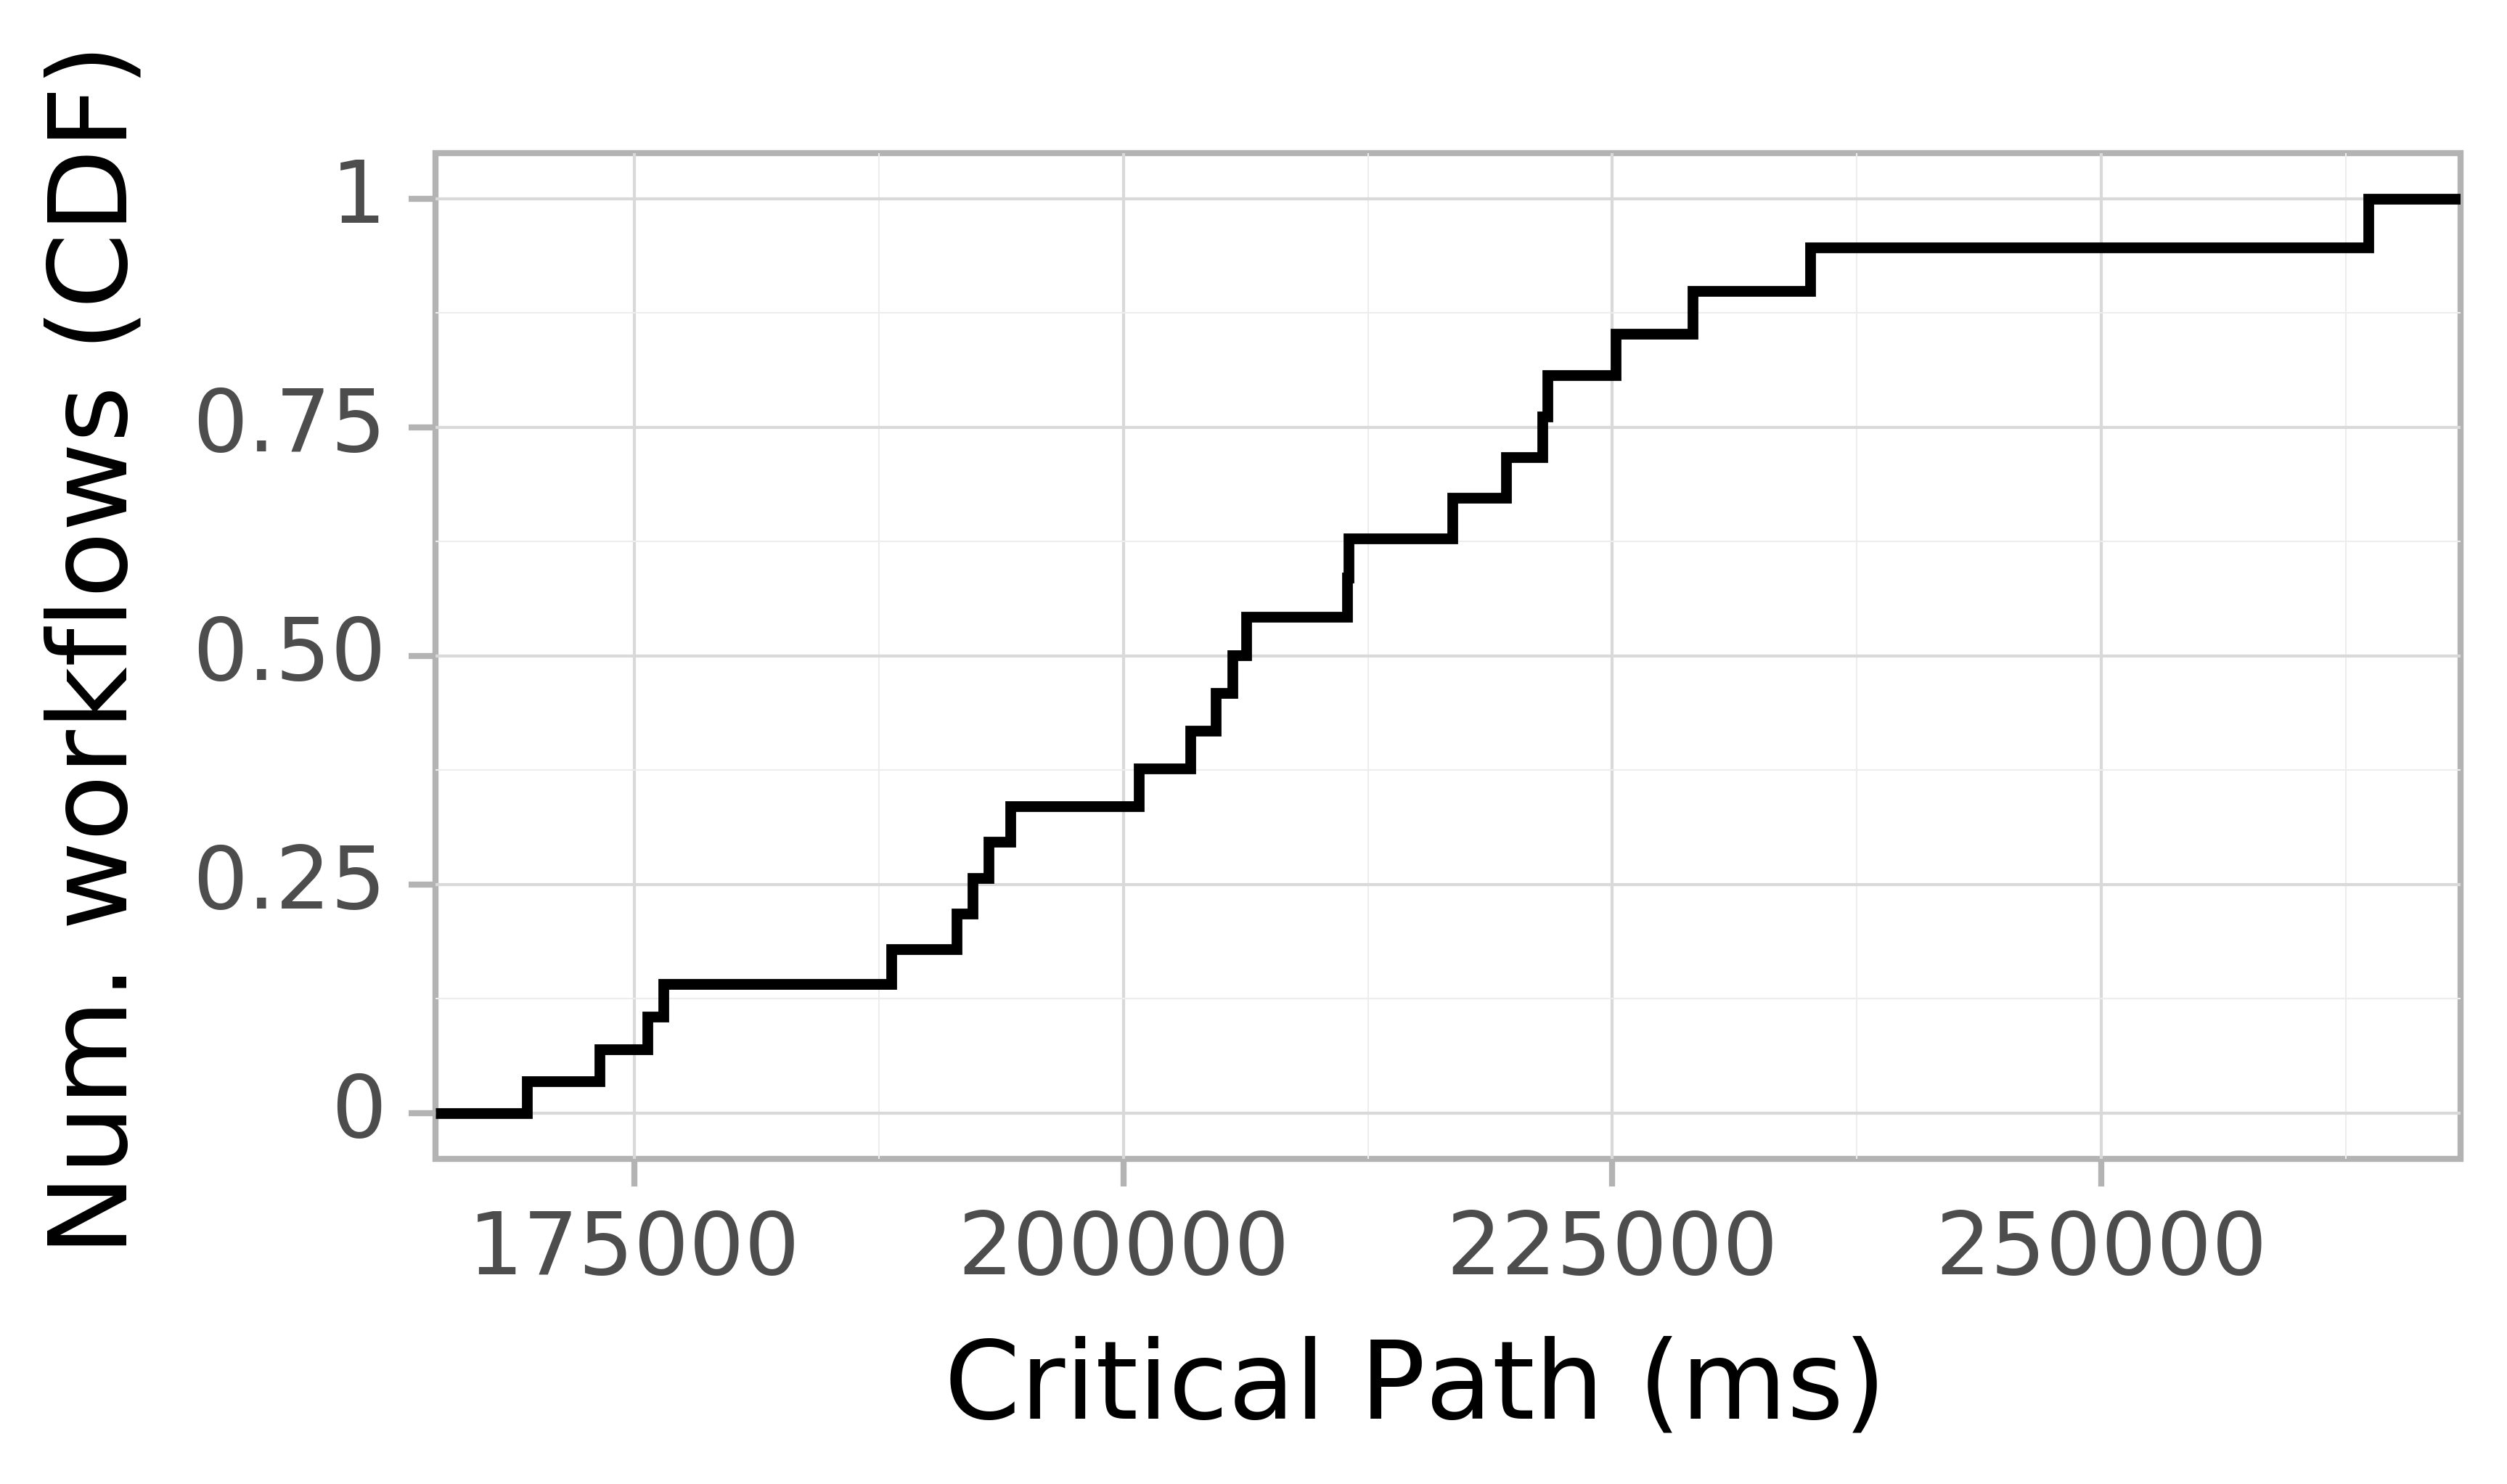 Job runtime CDF graph for the askalon-new_ee69 trace.